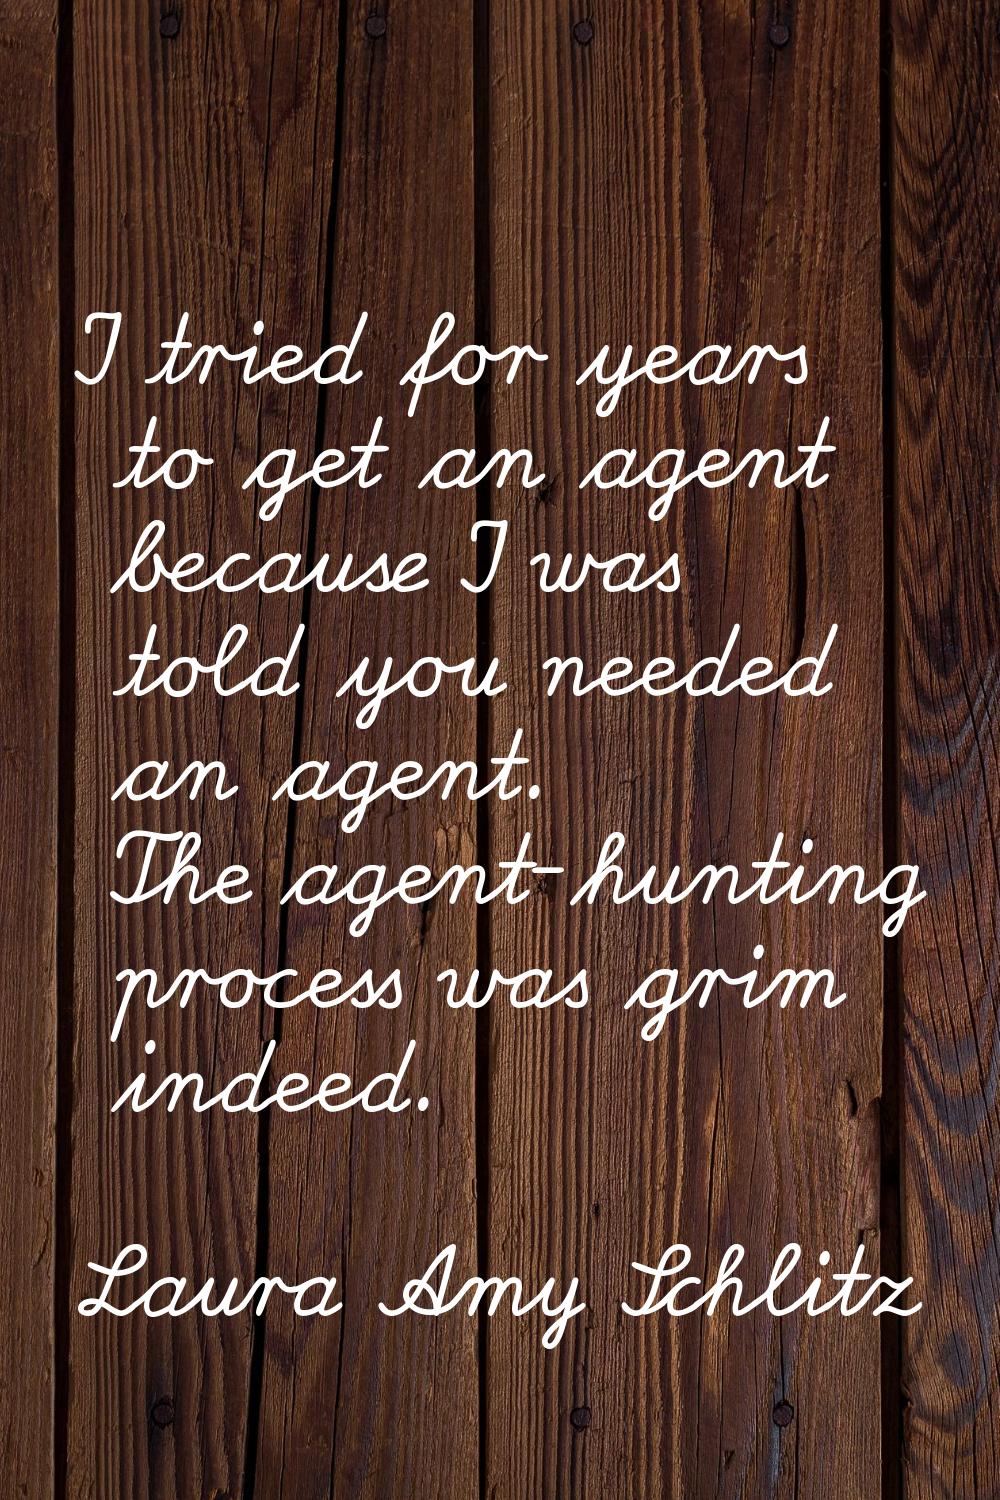 I tried for years to get an agent because I was told you needed an agent. The agent-hunting process